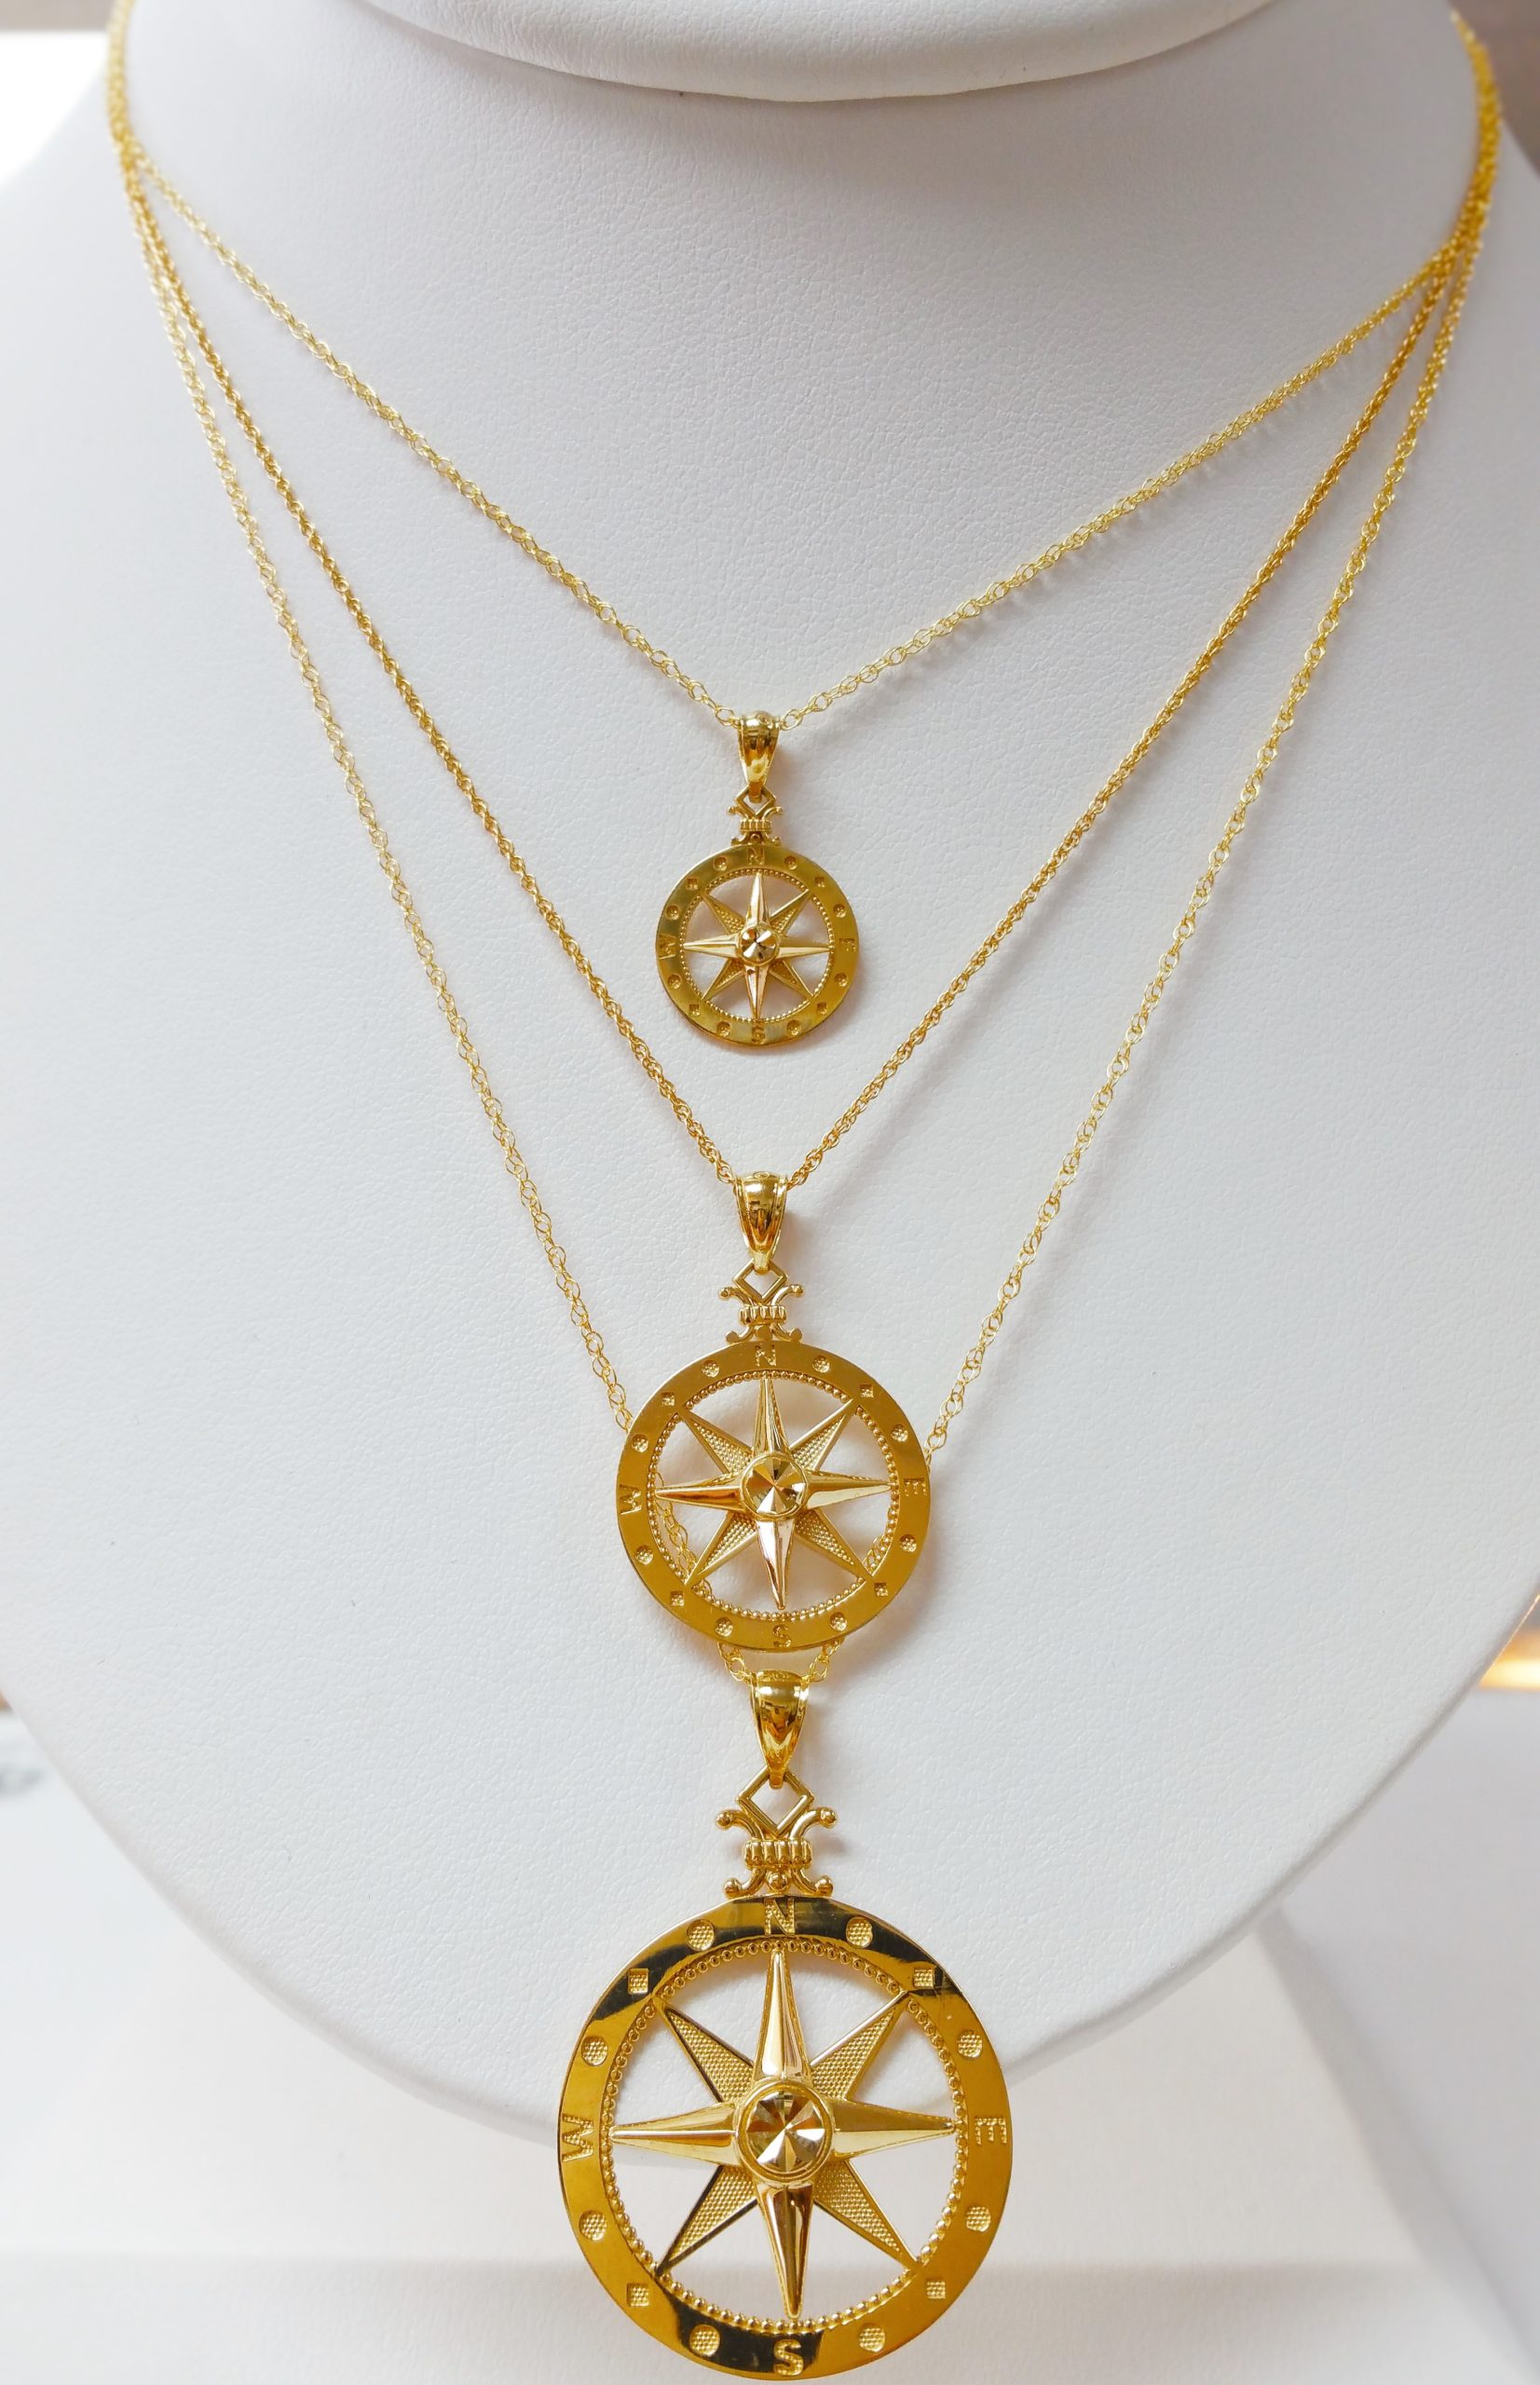 Macy's Diamond Accent Gold-plated Compass Pendant Necklace - Macy's | Compass  pendant, Gold pendant necklace, Diamond accent